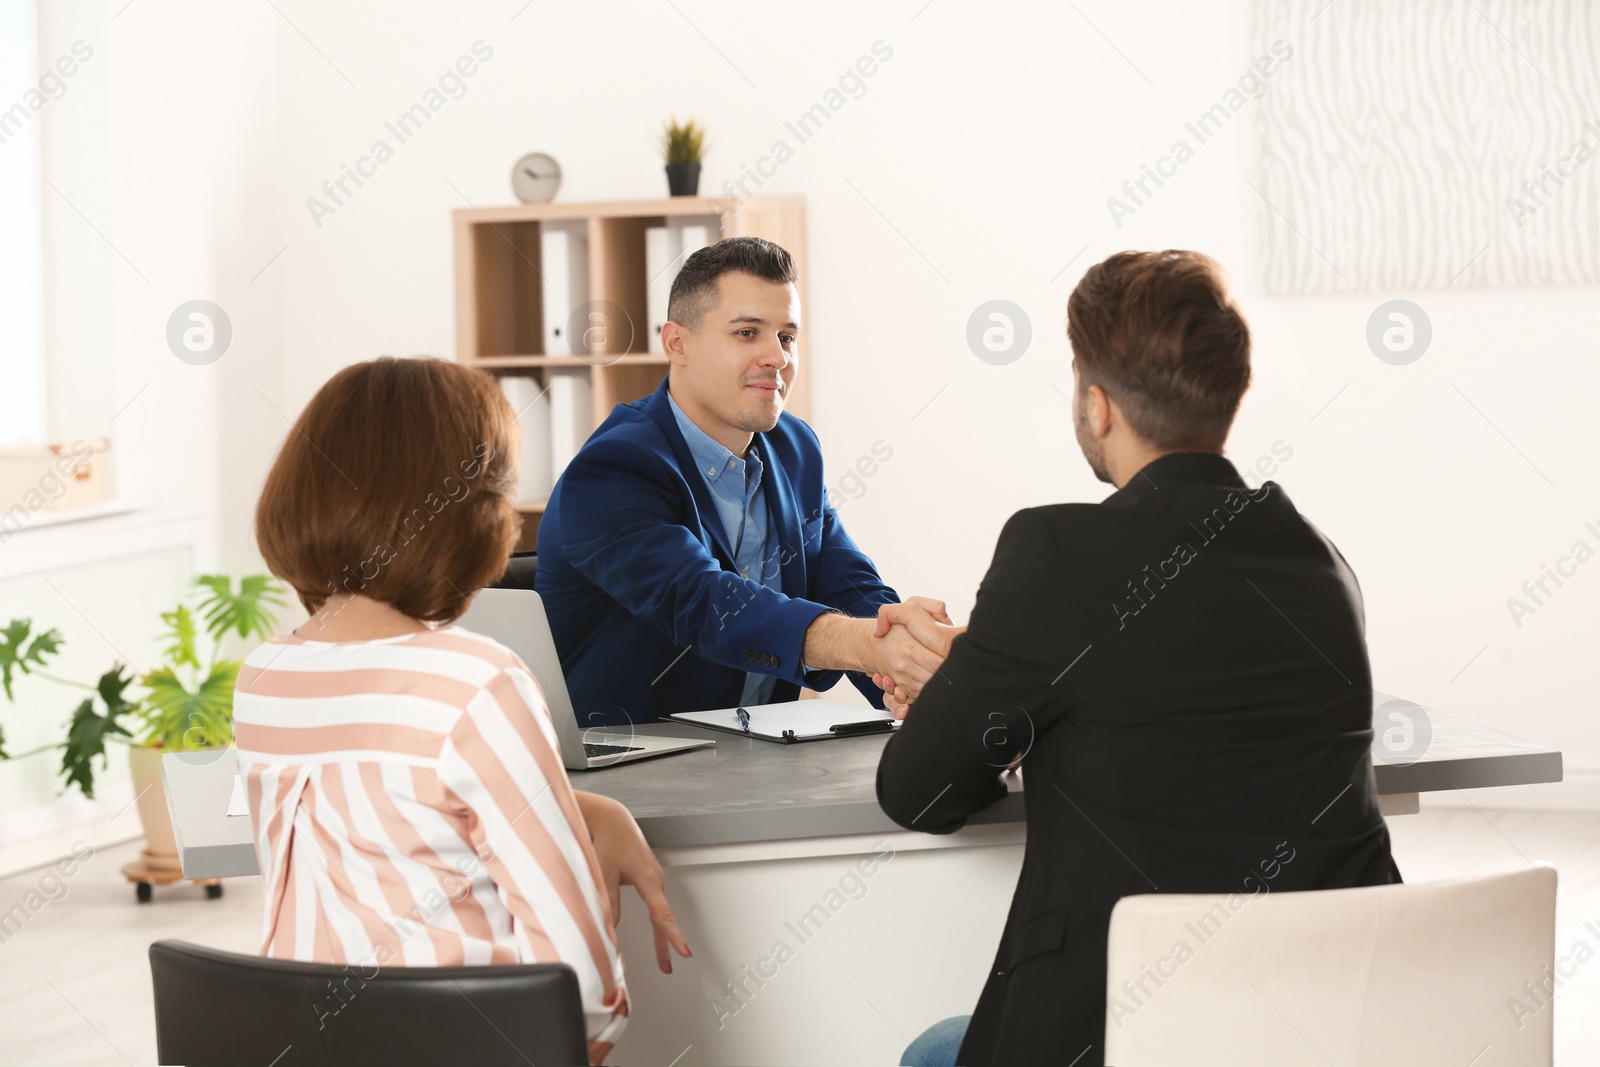 Photo of Human resources manager shaking hands with applicant before job interview in office